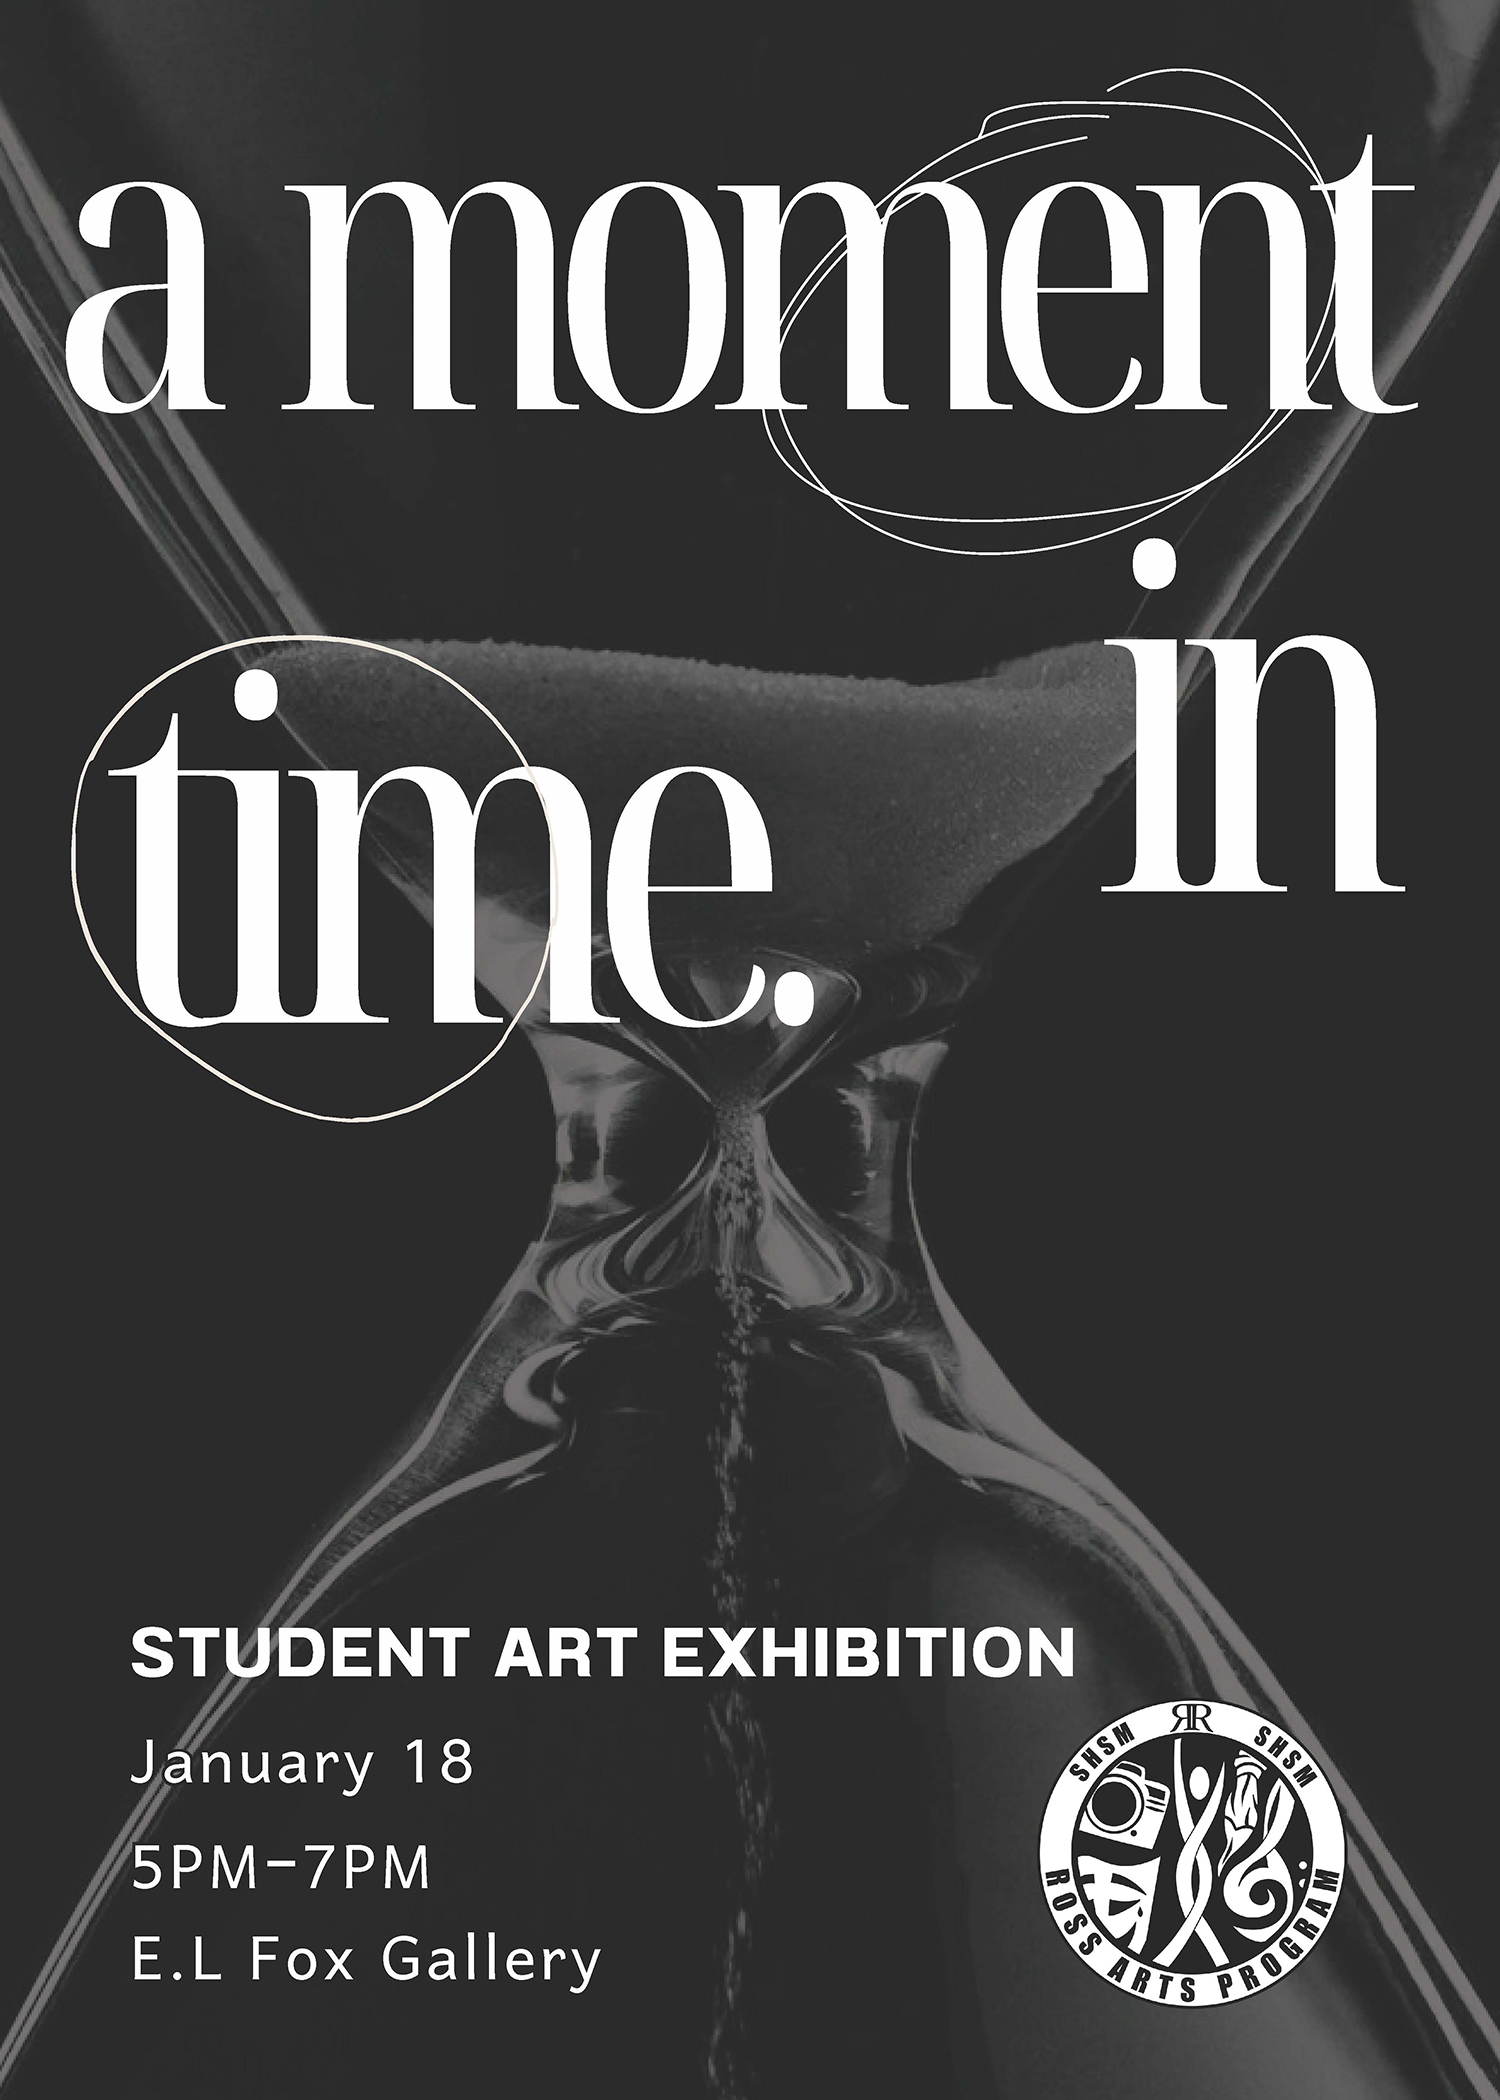 A poster advertising the art show